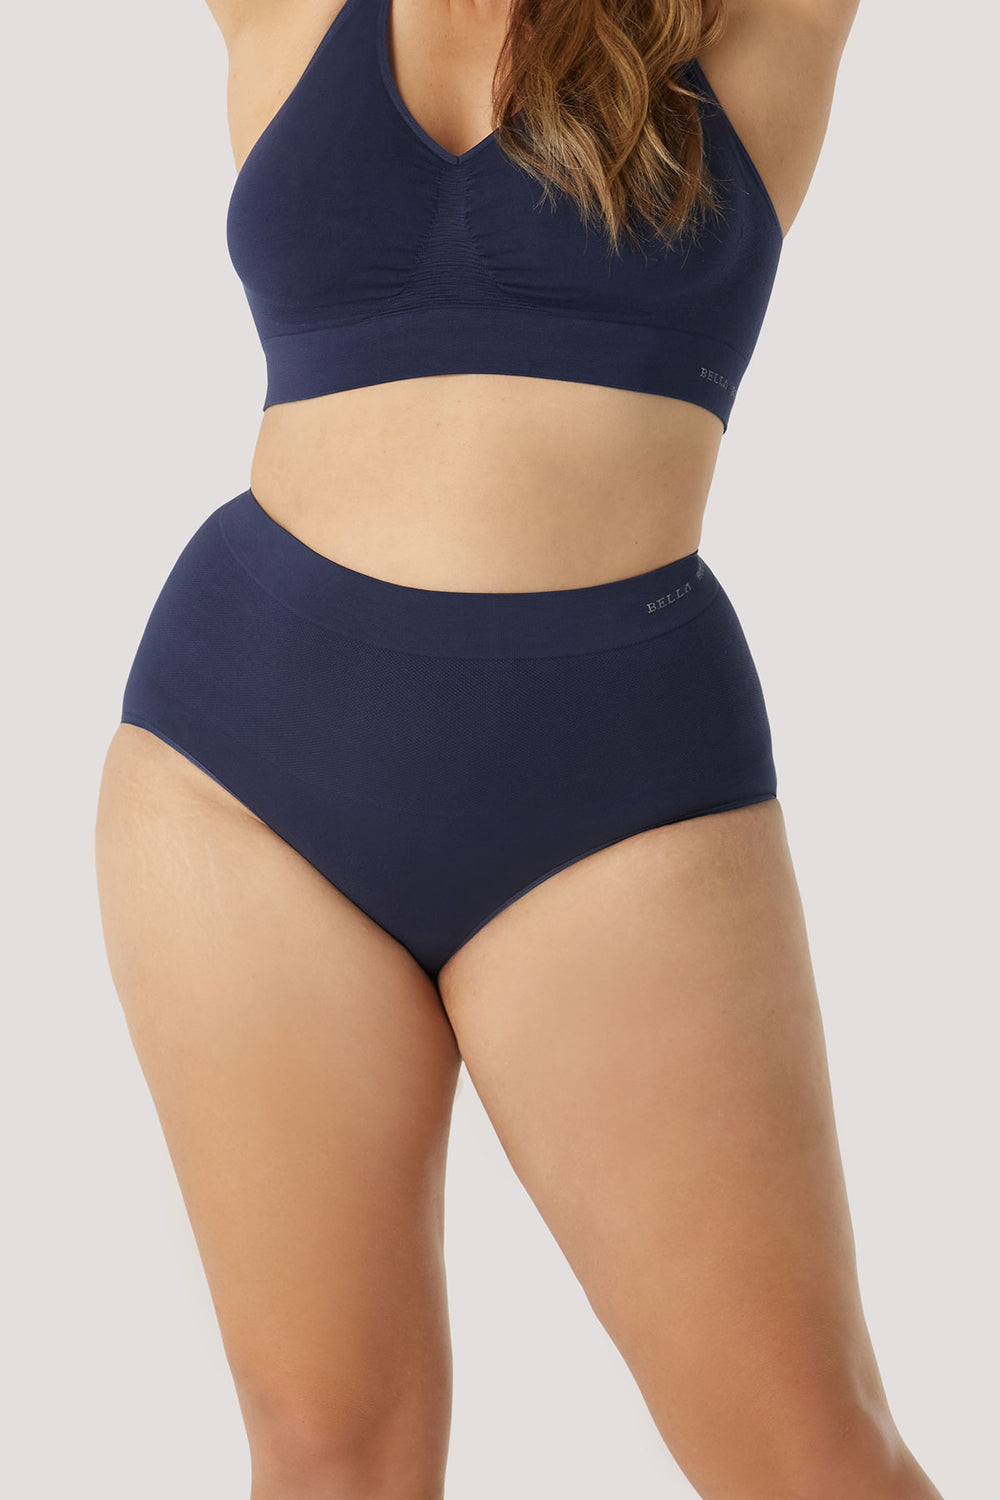 Super Savers UK - These bamboo cotton bras are sooo